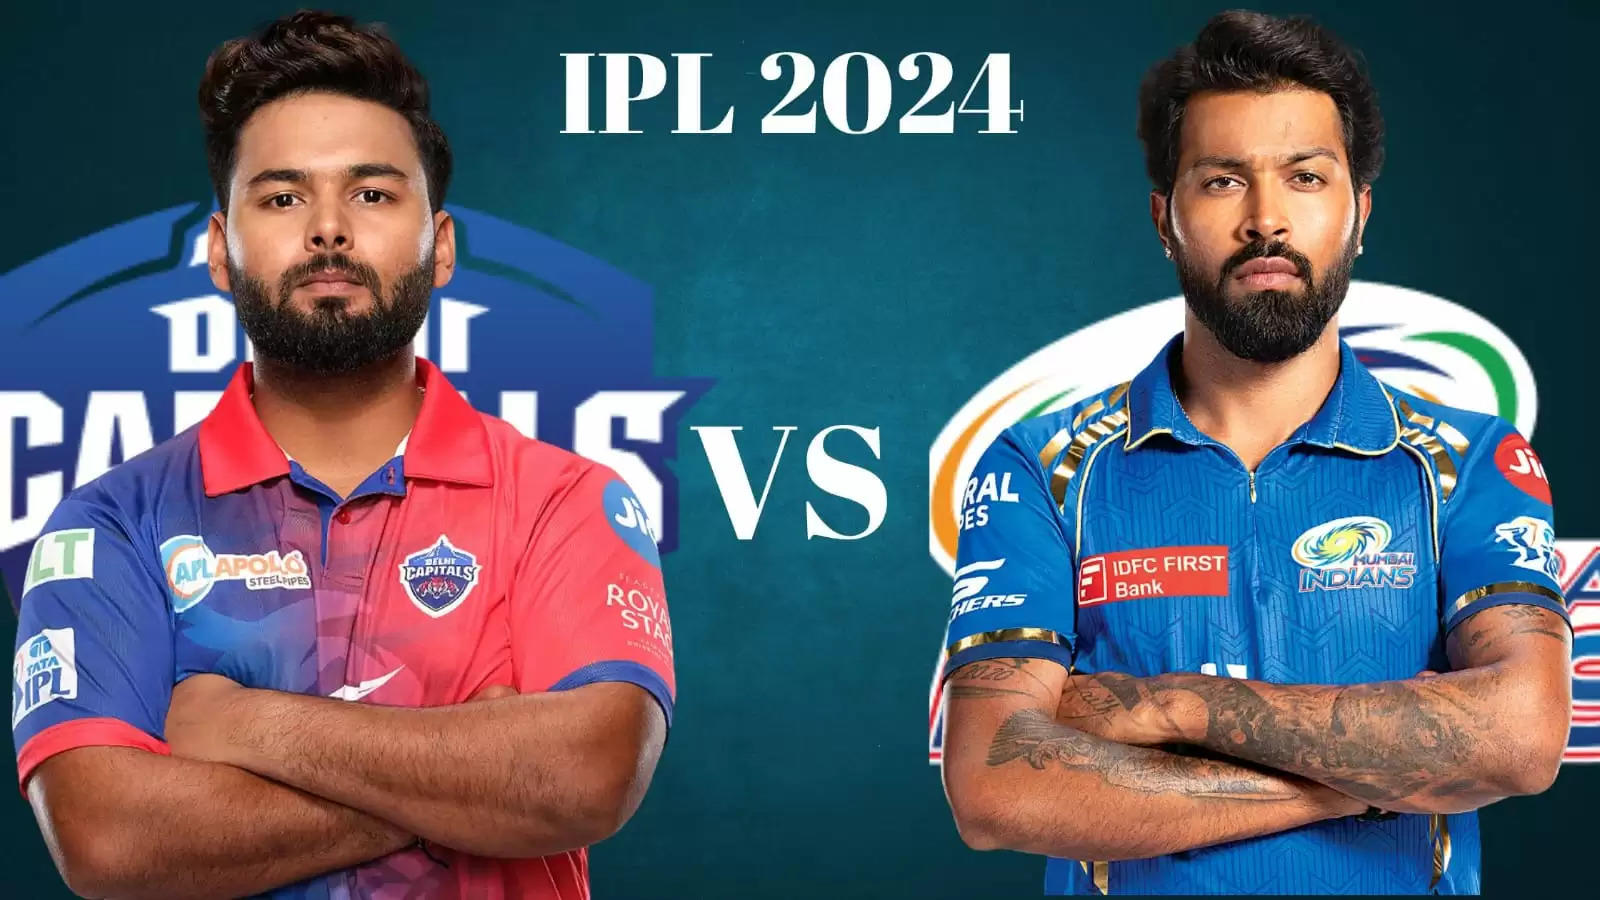 DC vs MI Dream11 Prediction Today Match 43: Playing XI, IPL 2024 Fantasy Cricket Tips, Delhi Capitals vs Mumbai Indians Dream11 Team, Weather and Pitch Report, Injury Updates and Team News